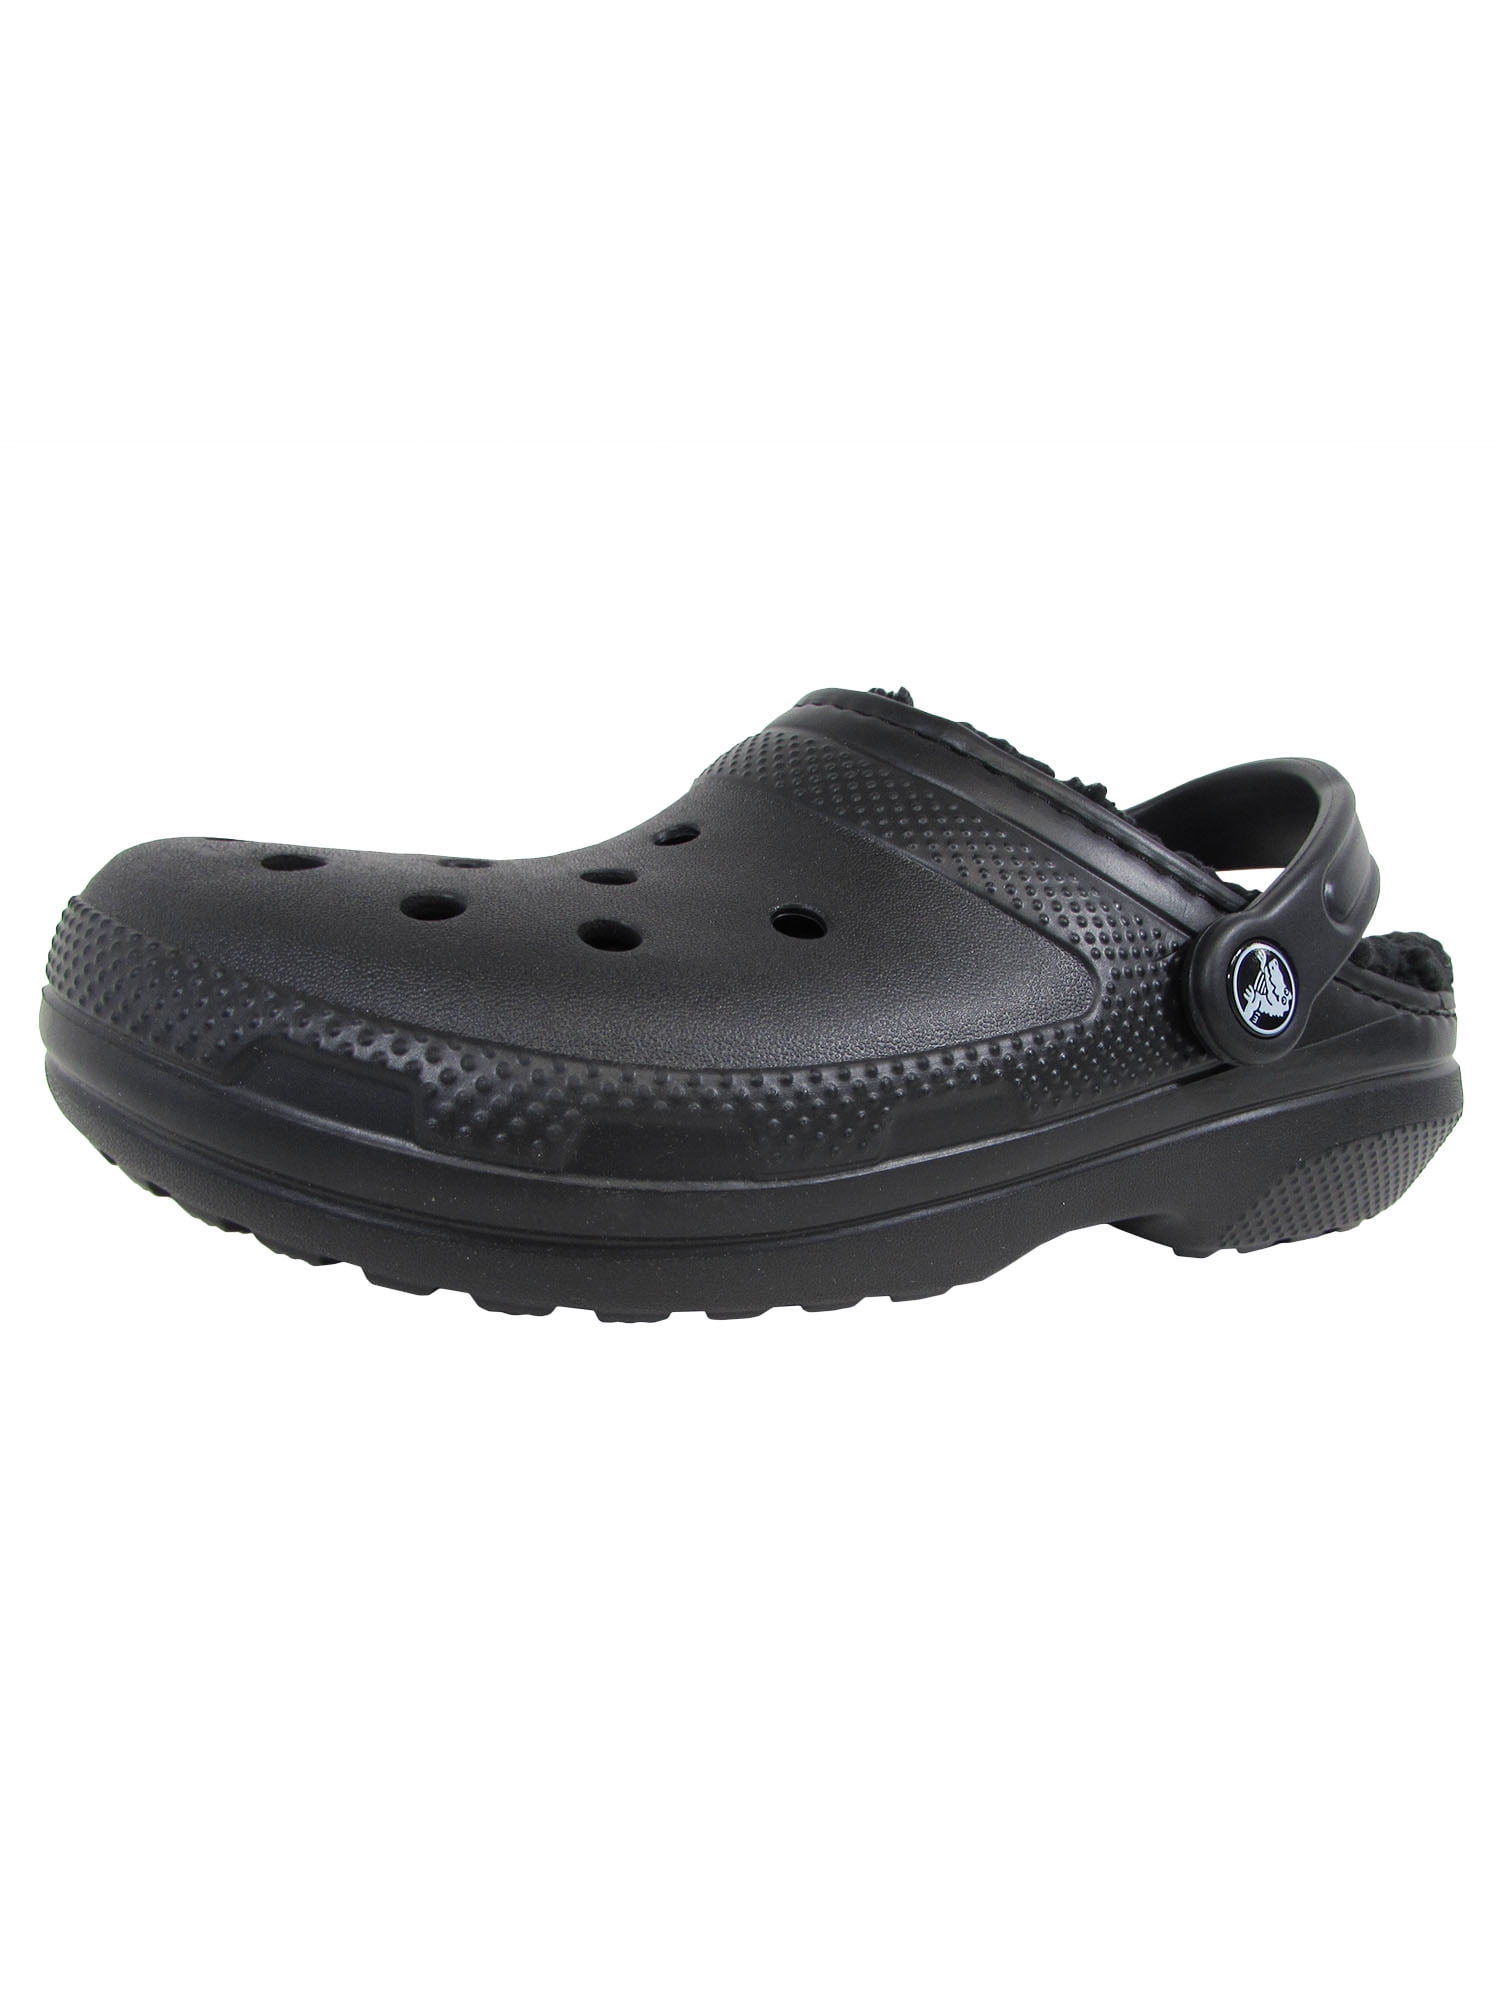 Crocs winter faux shearling lined clog slippers youth boy US size 1 2 3 Black 